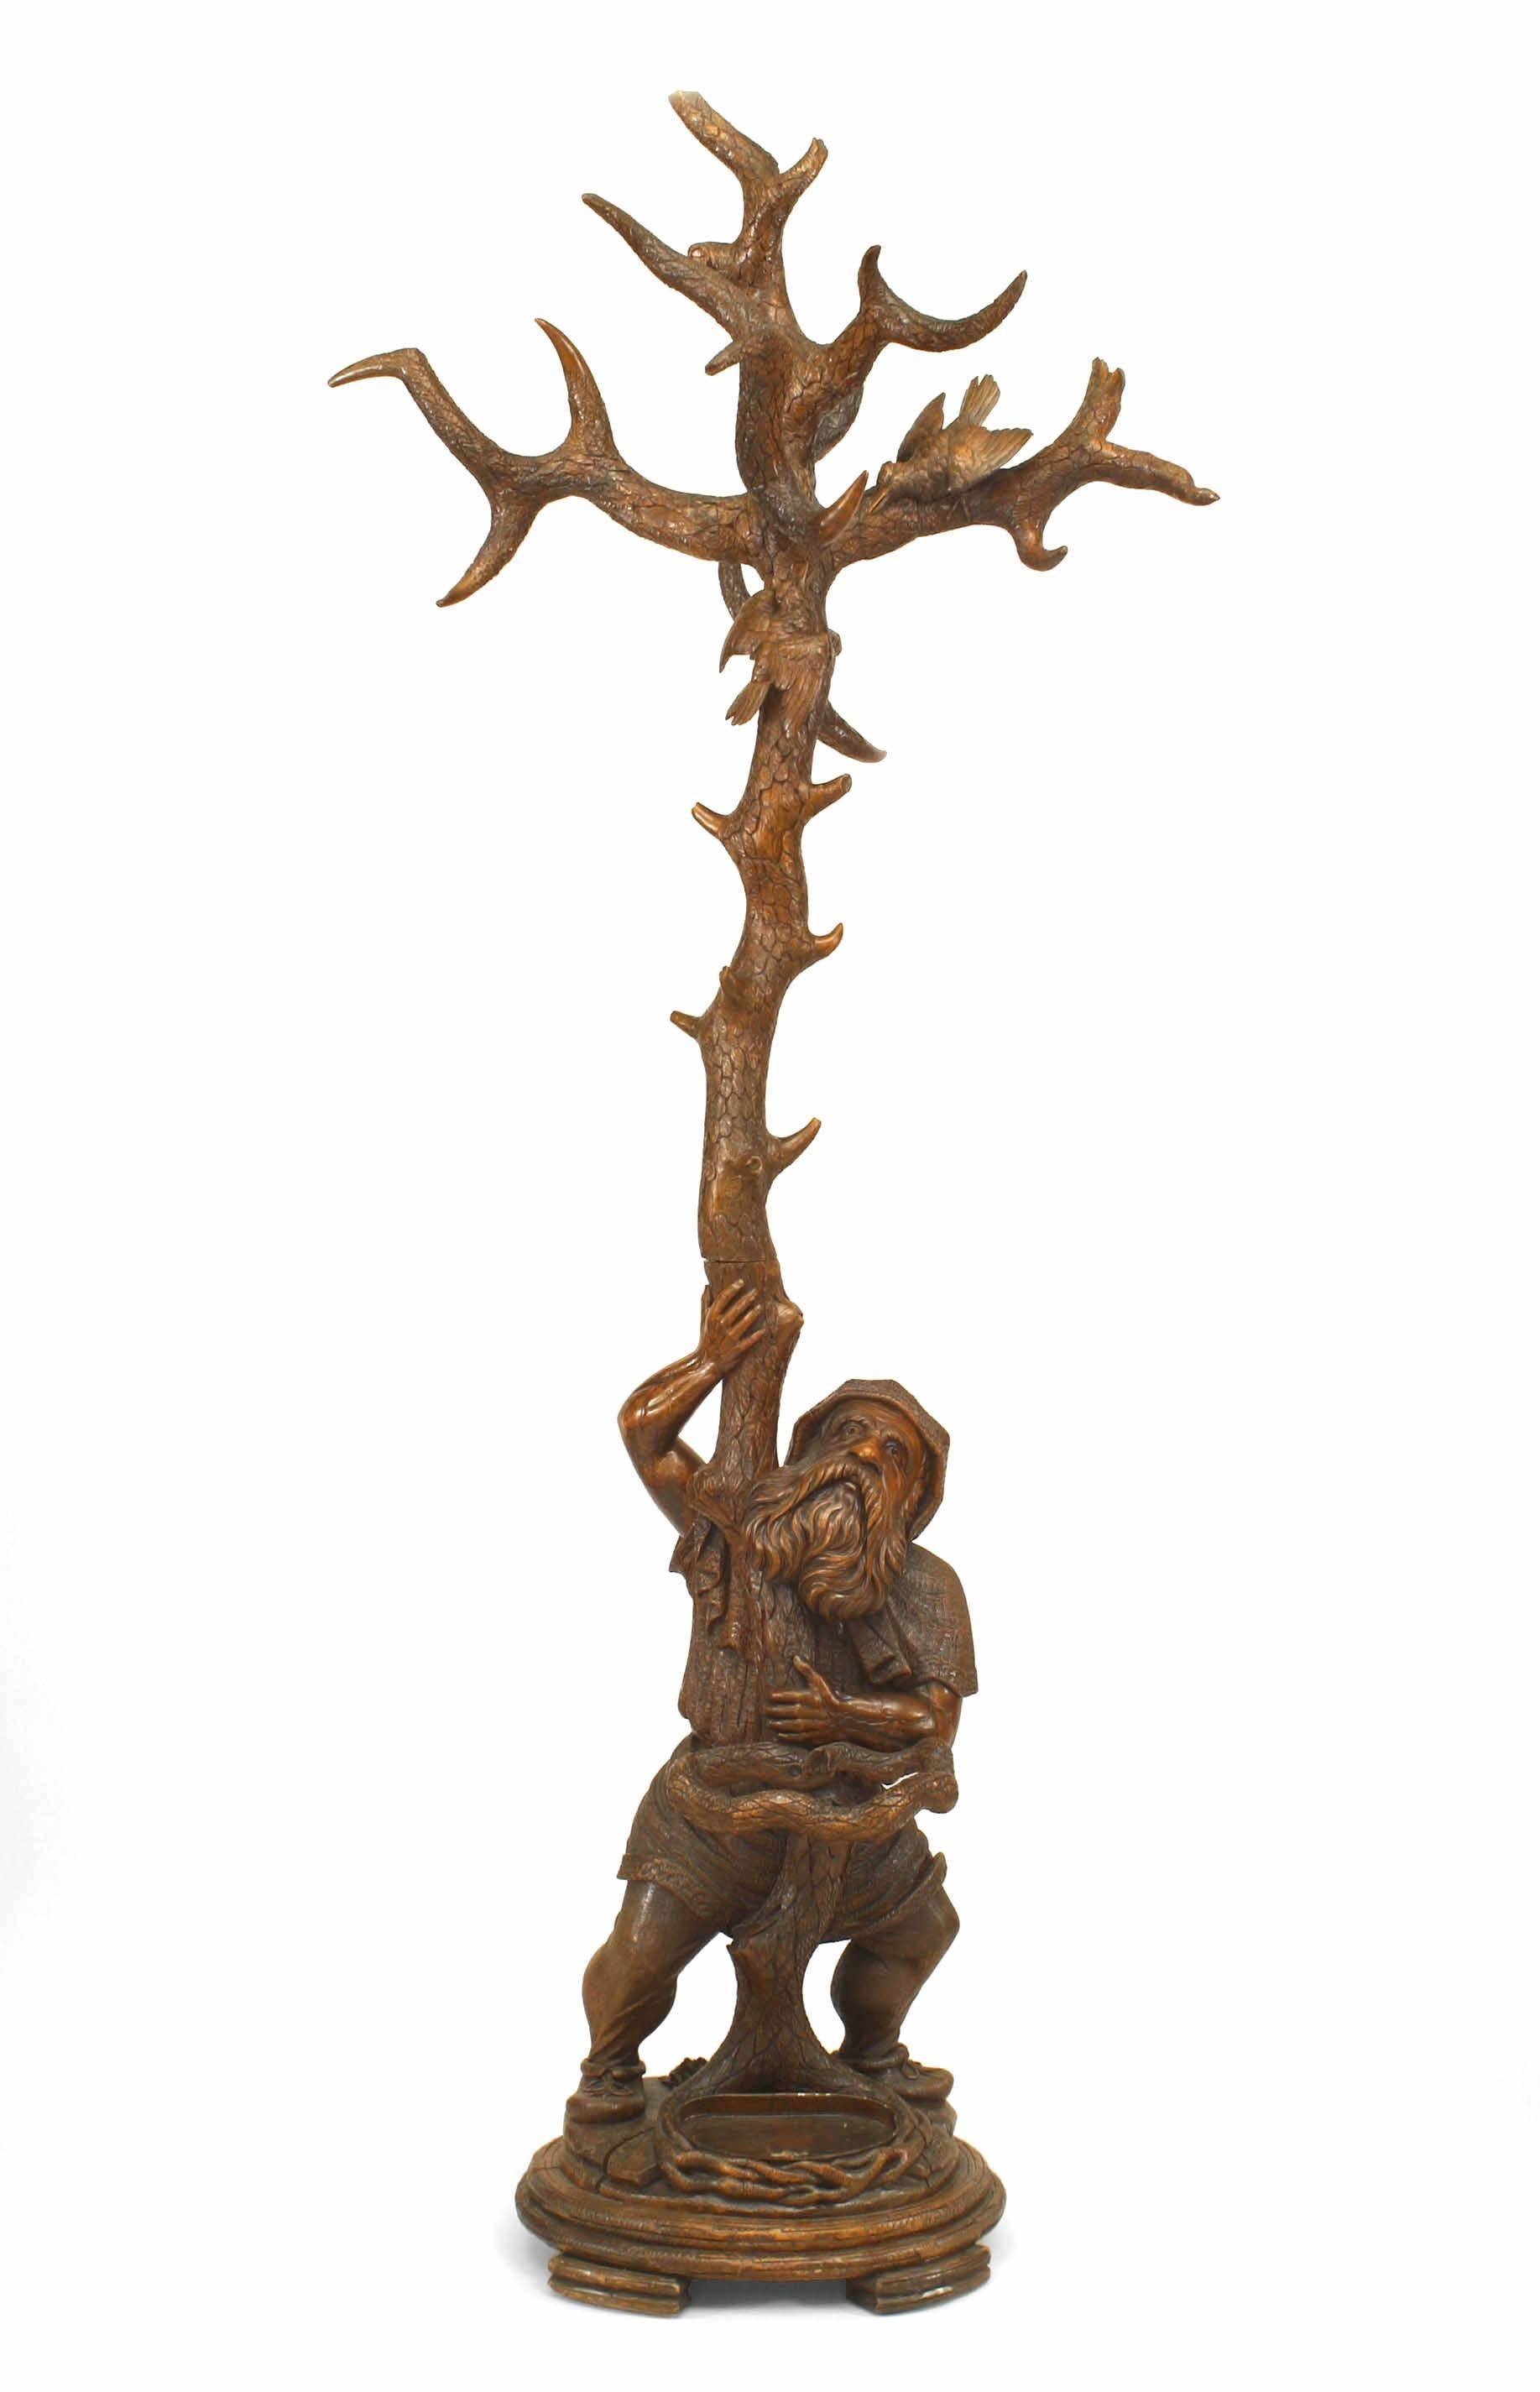 Rustic Black Forest-style (19th Century) carved walnut hatrack/umbrella stand with gnome figure holding tree form with birds in upper branches.
